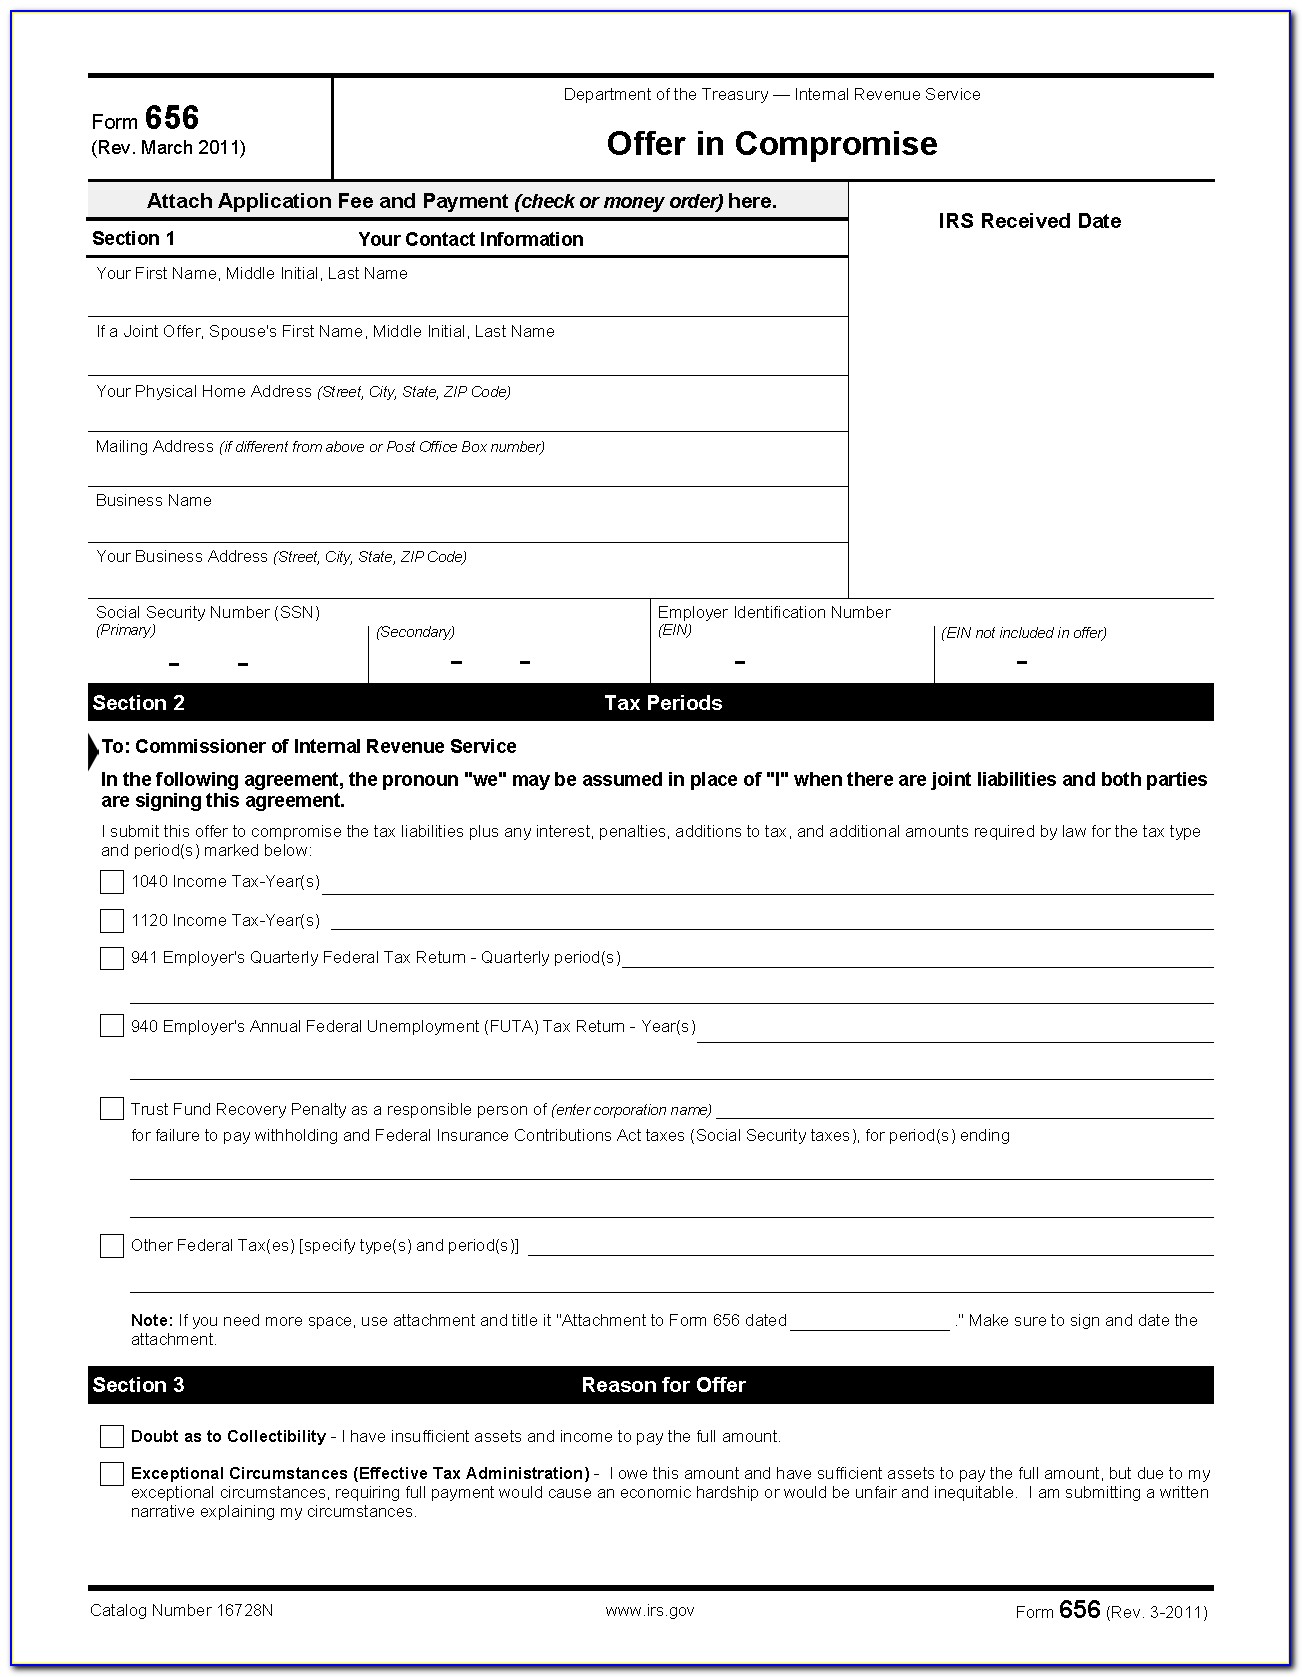 Irs.gov Offer In Compromise Form